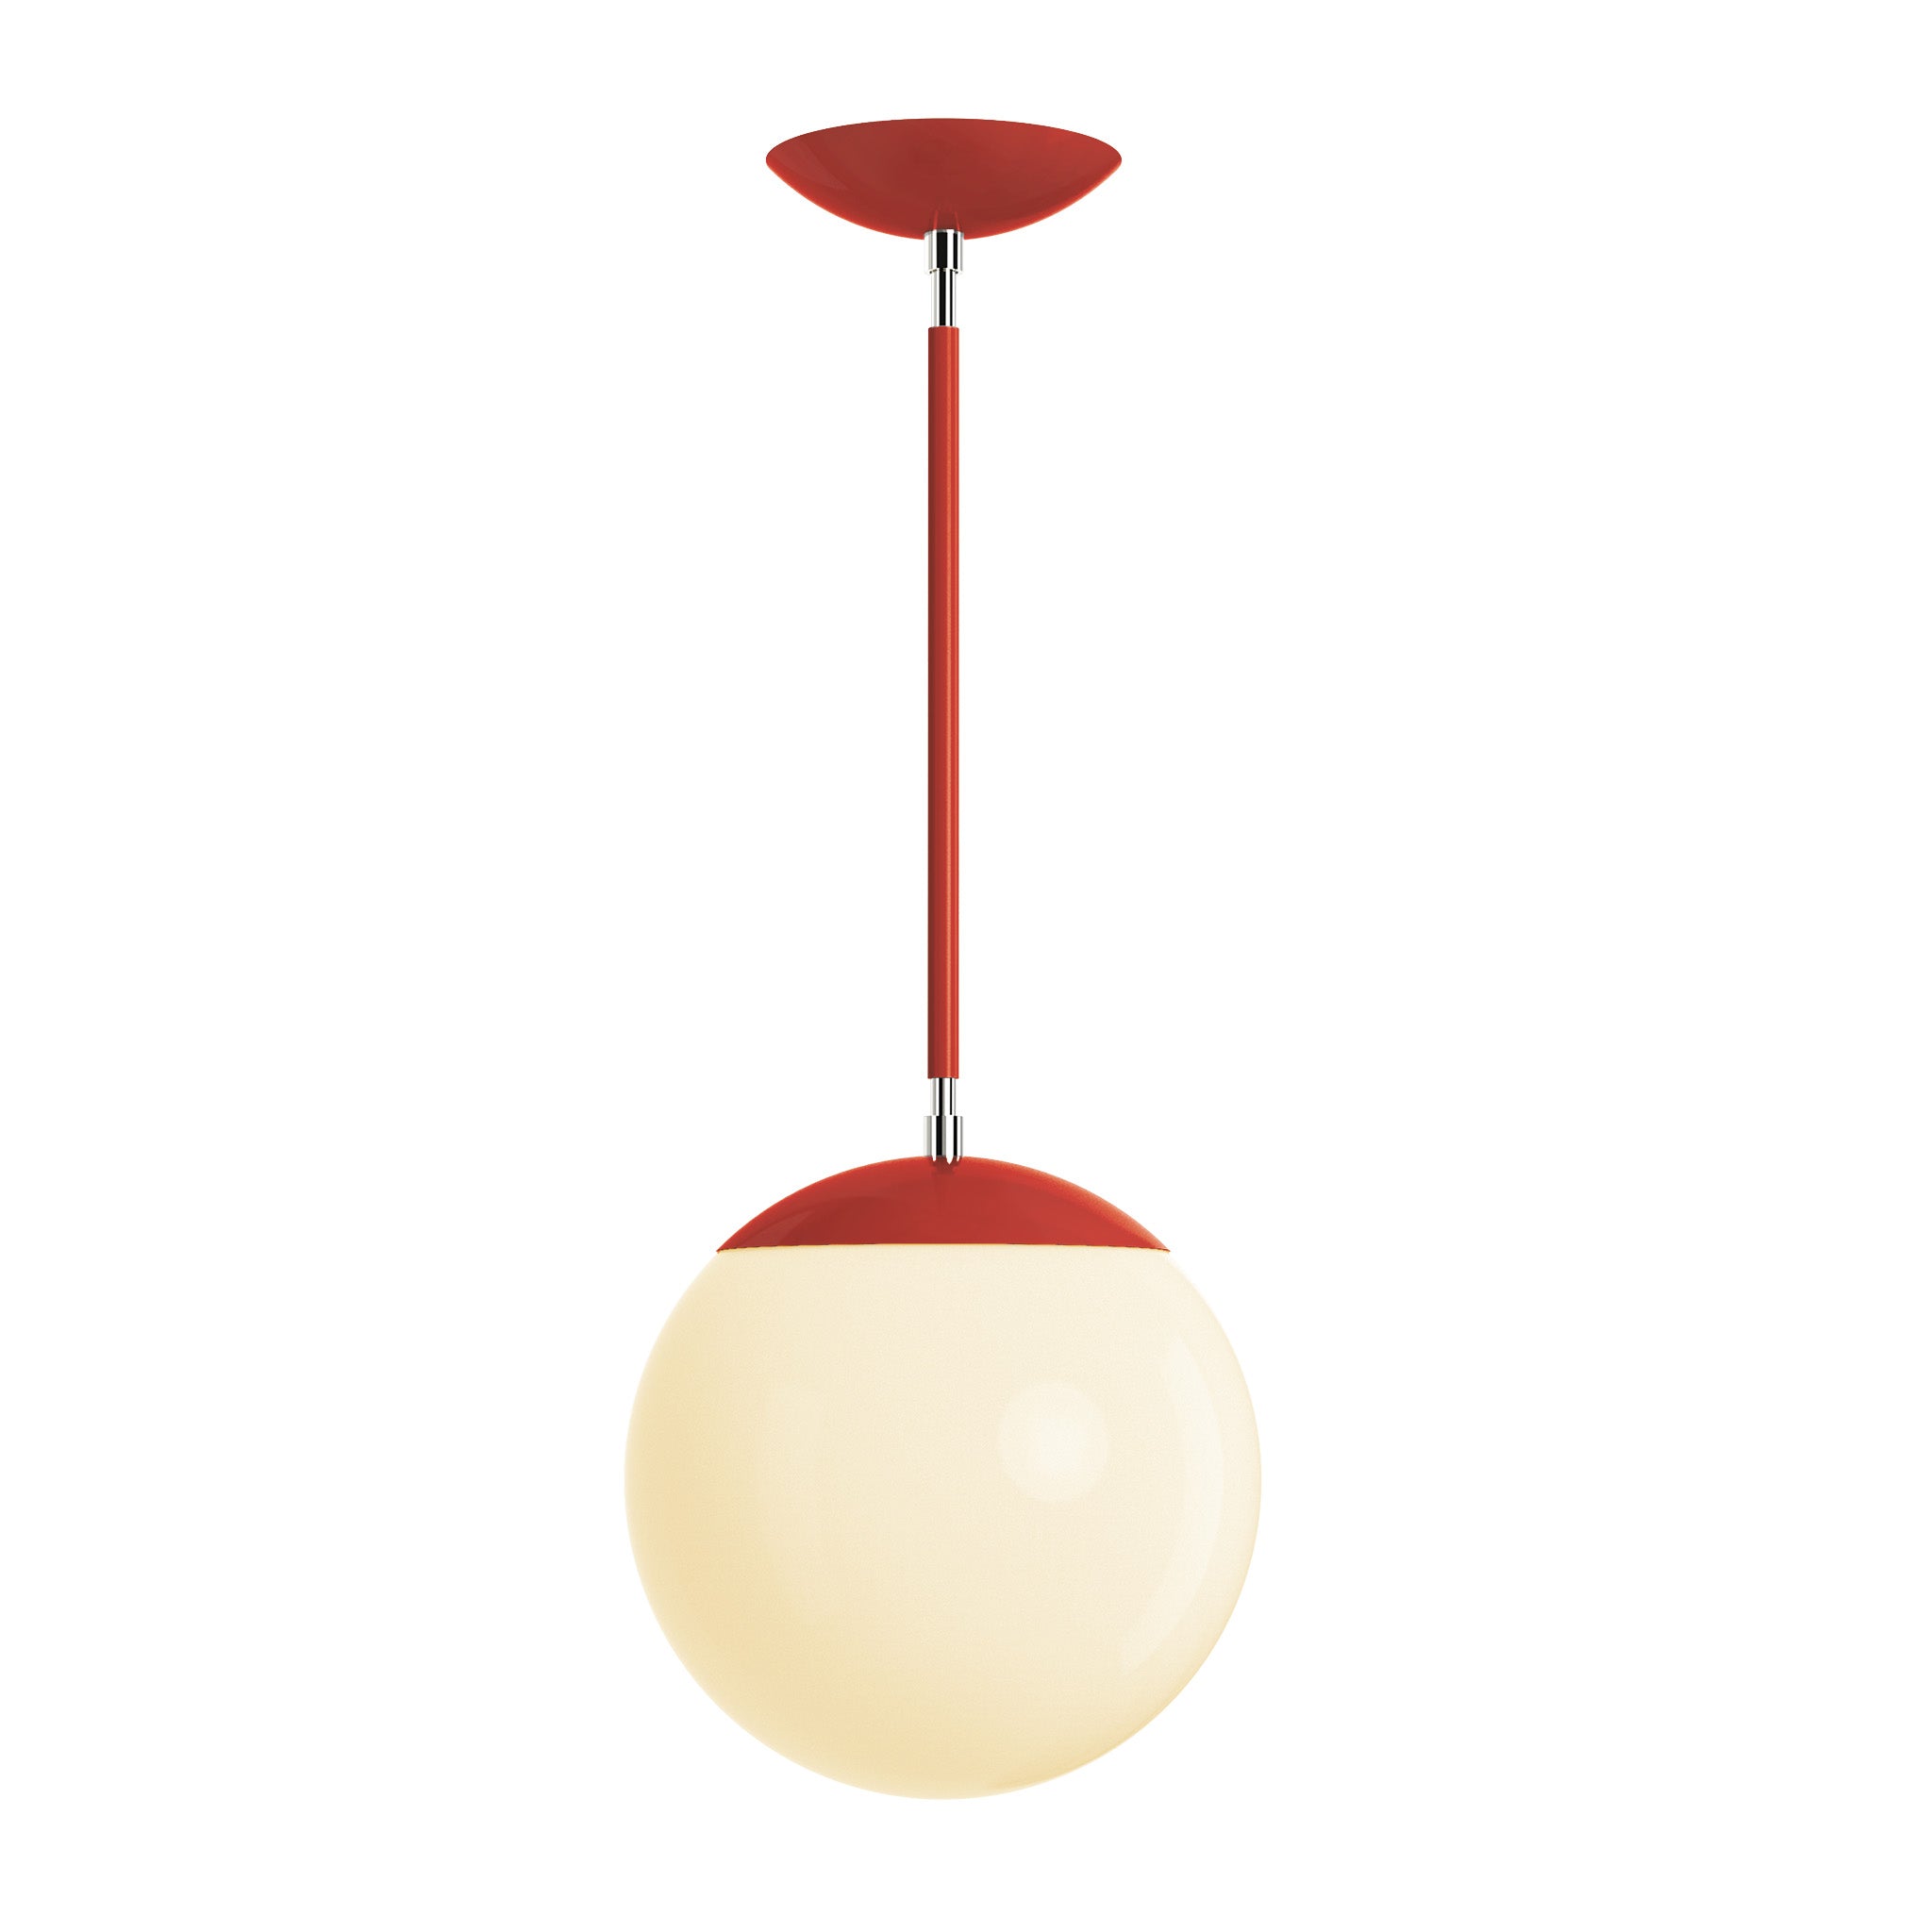 Polished nickel and riding hood red cap globe pendant 10" dutton brown lighting